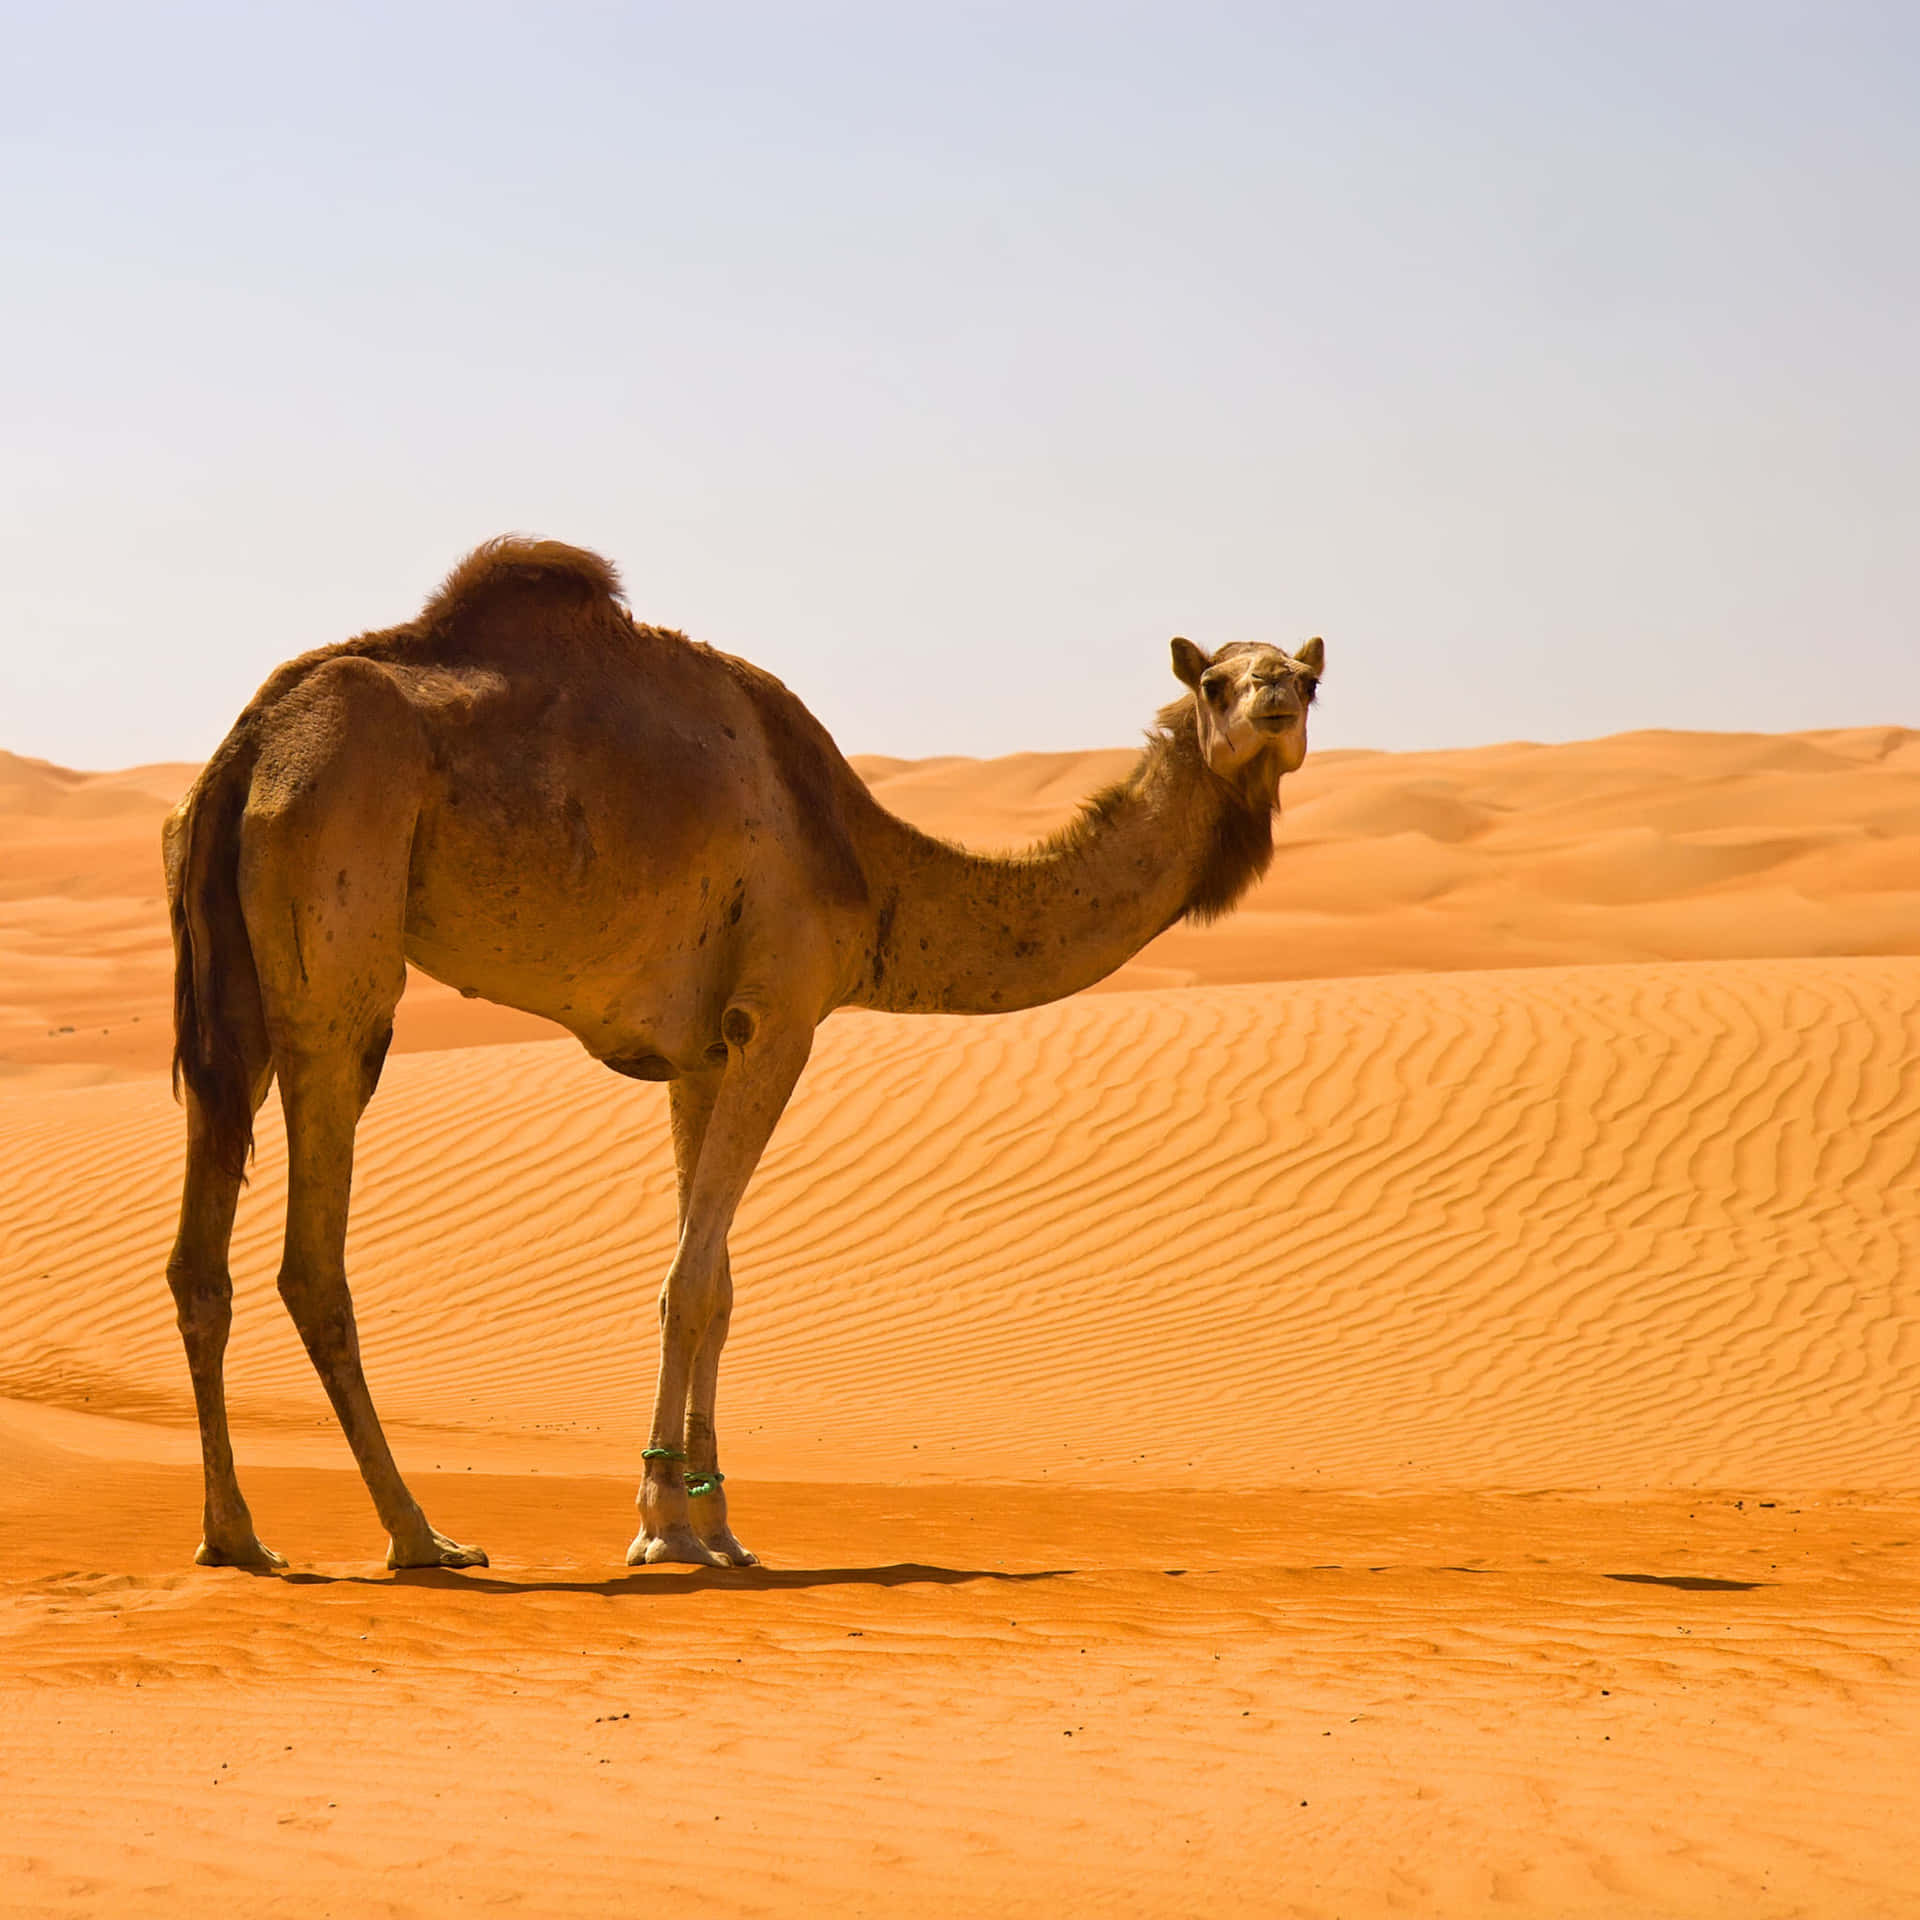 Enjoy the beauty of nature with a camel ride in the desert